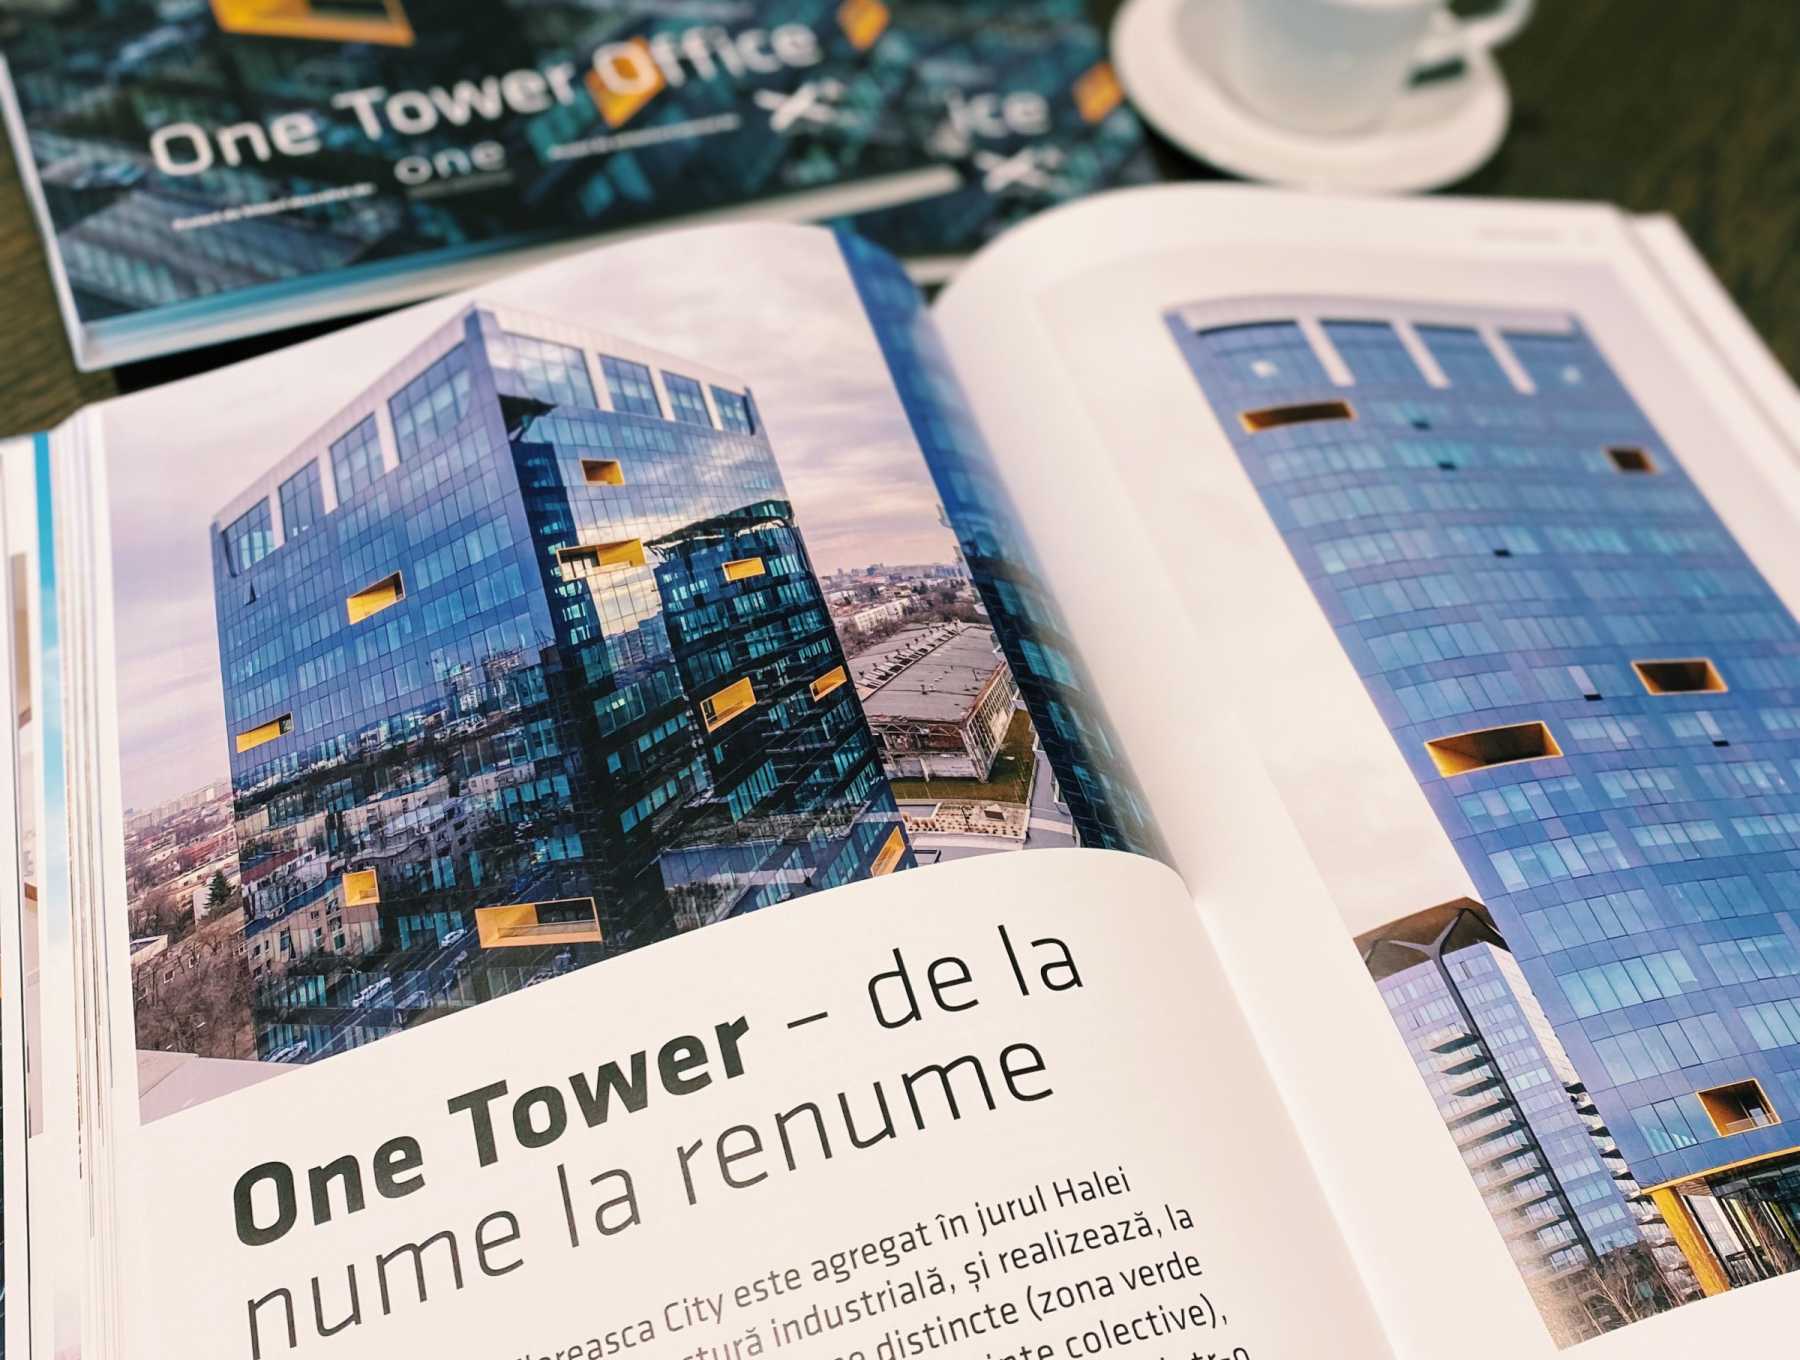 One Tower - from name to reputation, in an article by Igloo